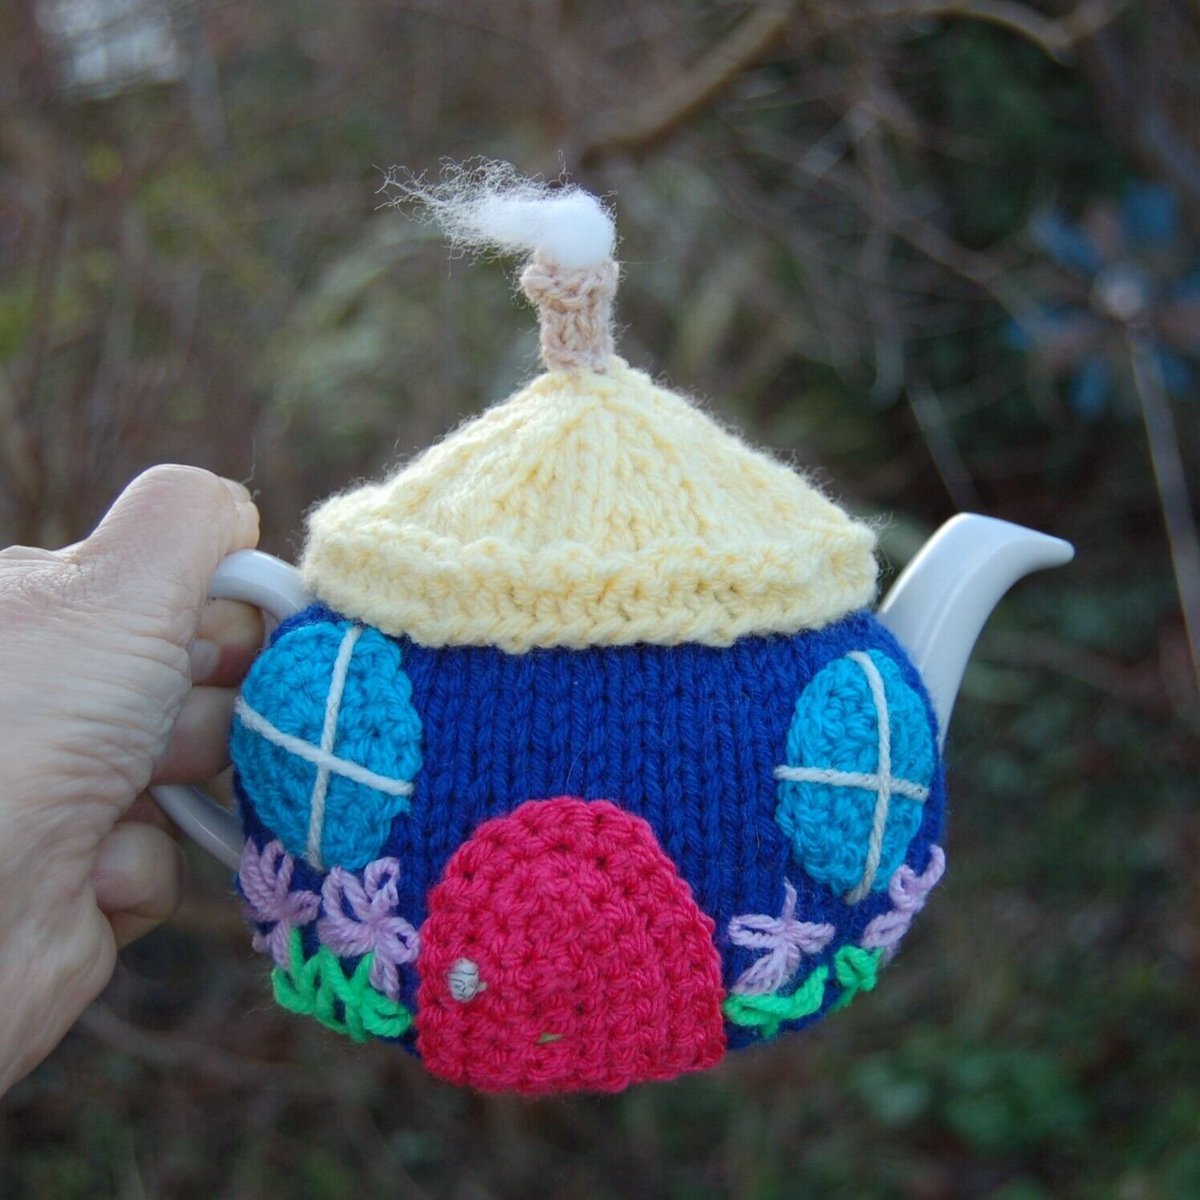 hand knitted or crochet tea cosy to fit a small one cup teapot - various designs ebay.co.uk/itm/1852048523… #eBay via @eBay_UK 

#teacosy #teacozy #teapotcover